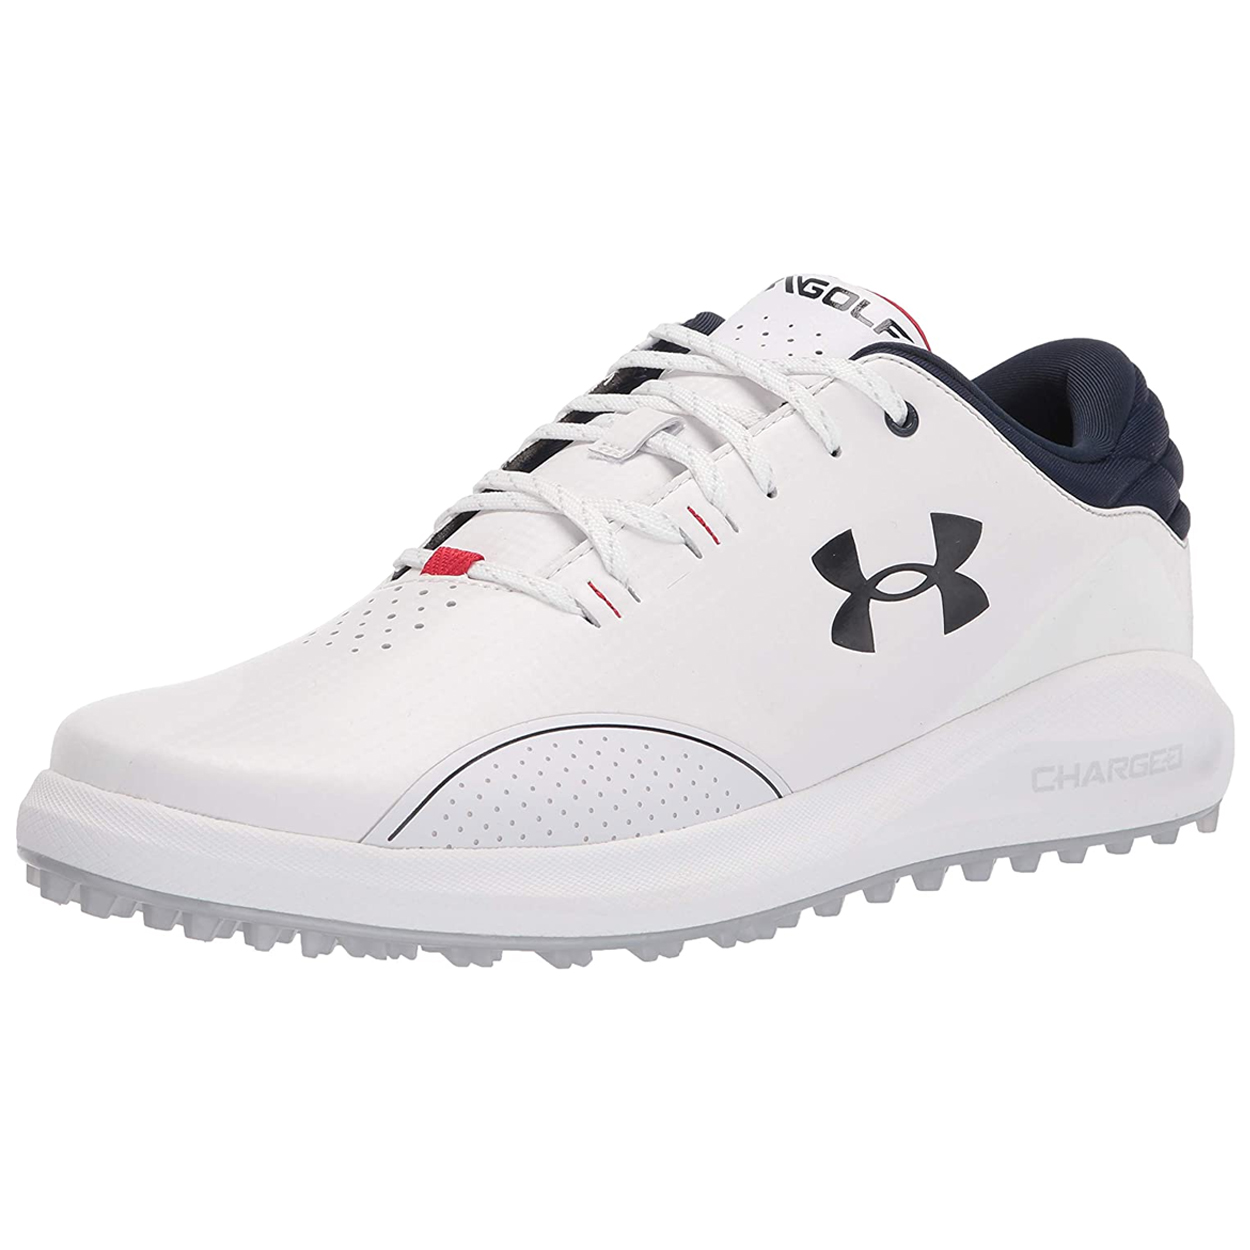 Under Armour Charged Breathe SL Ladies Golf Shoes, 49% OFF